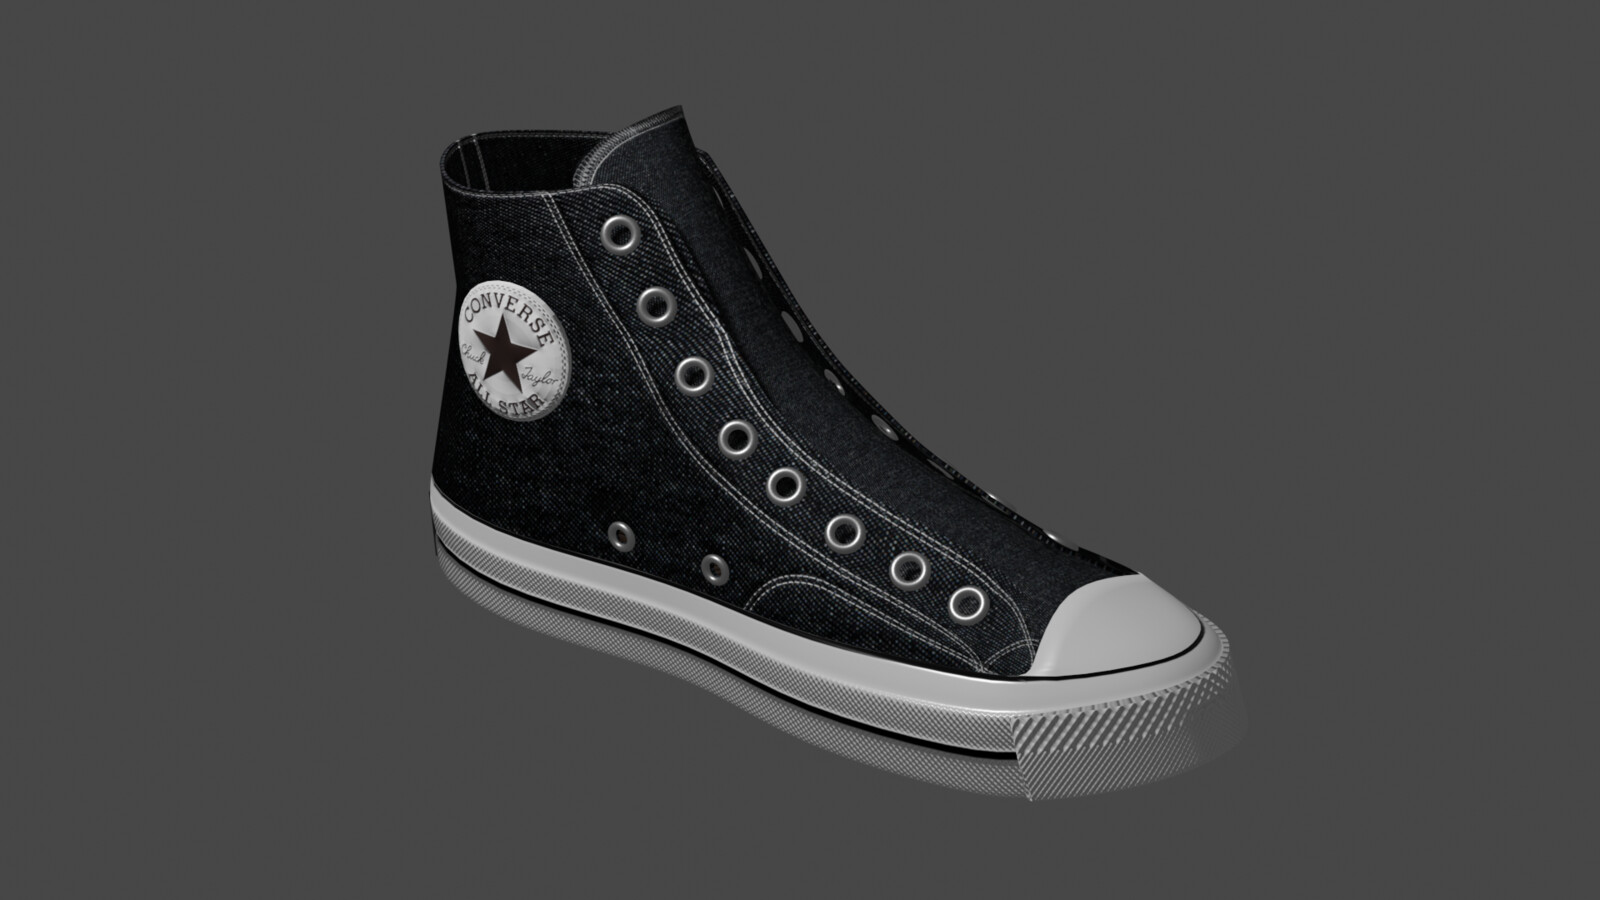 Converse Chuck Taylor's front